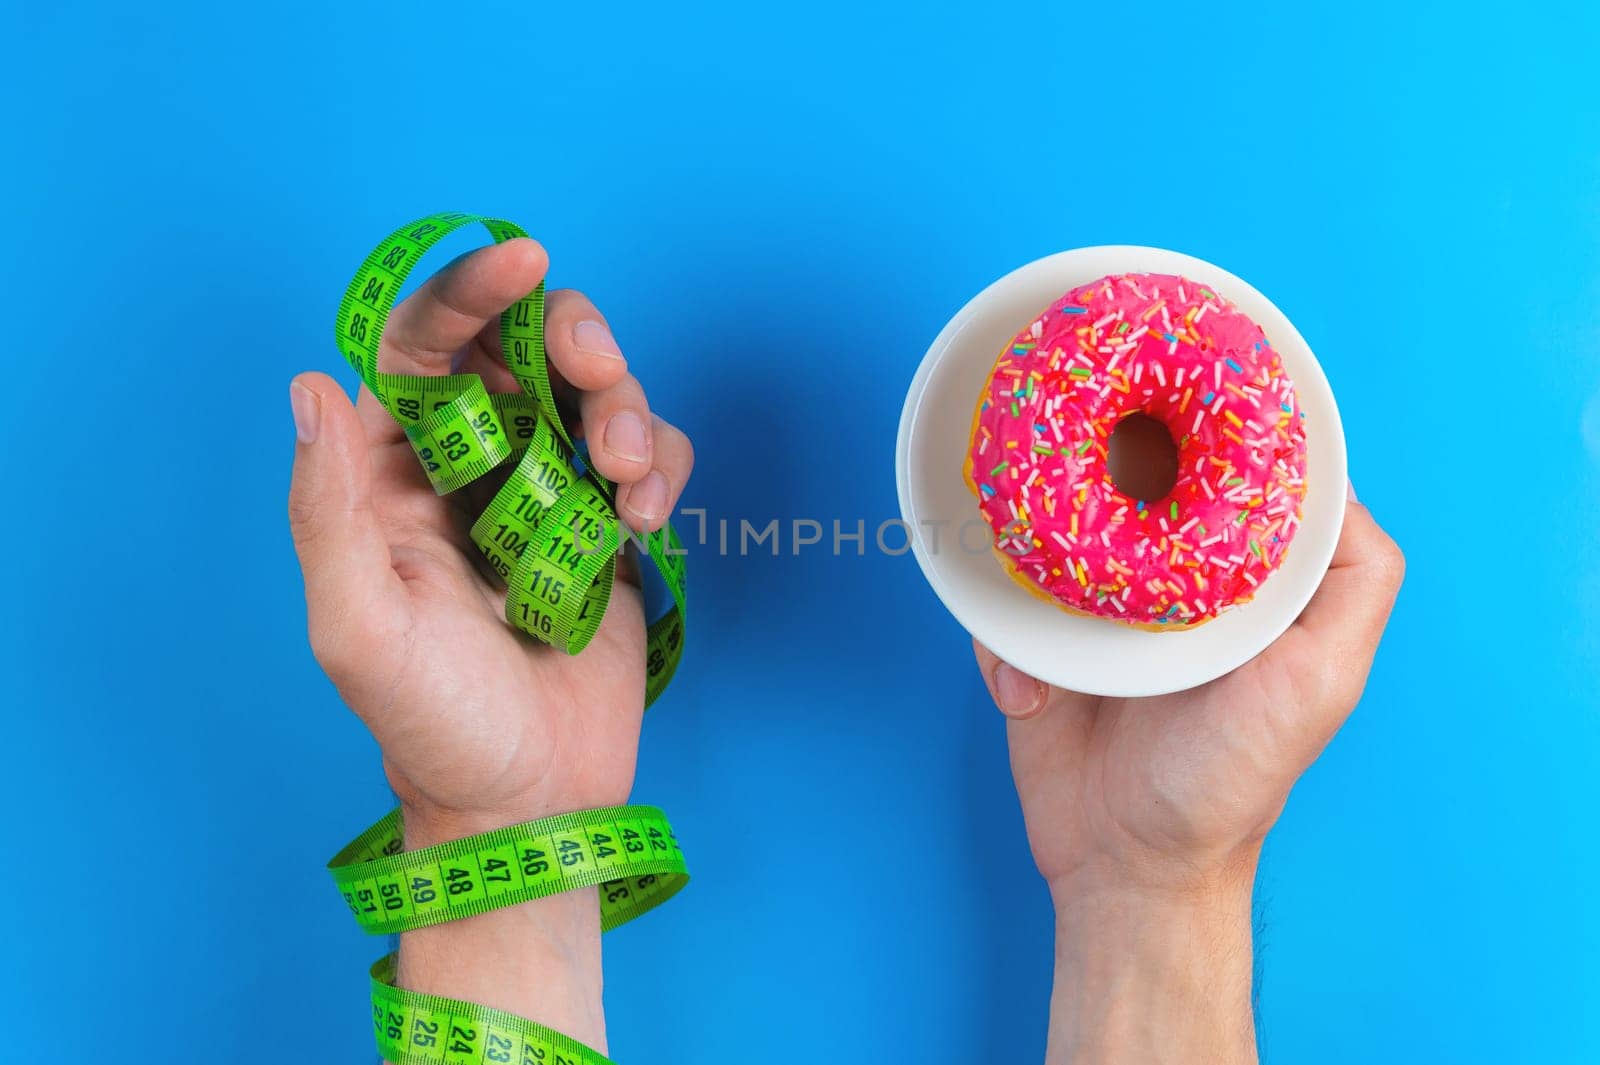 Male hand holding a pink donut on a blue background. Choosing between a donut and a measuring tape. Health and healthy lifestyle or unhealthy sweet food.